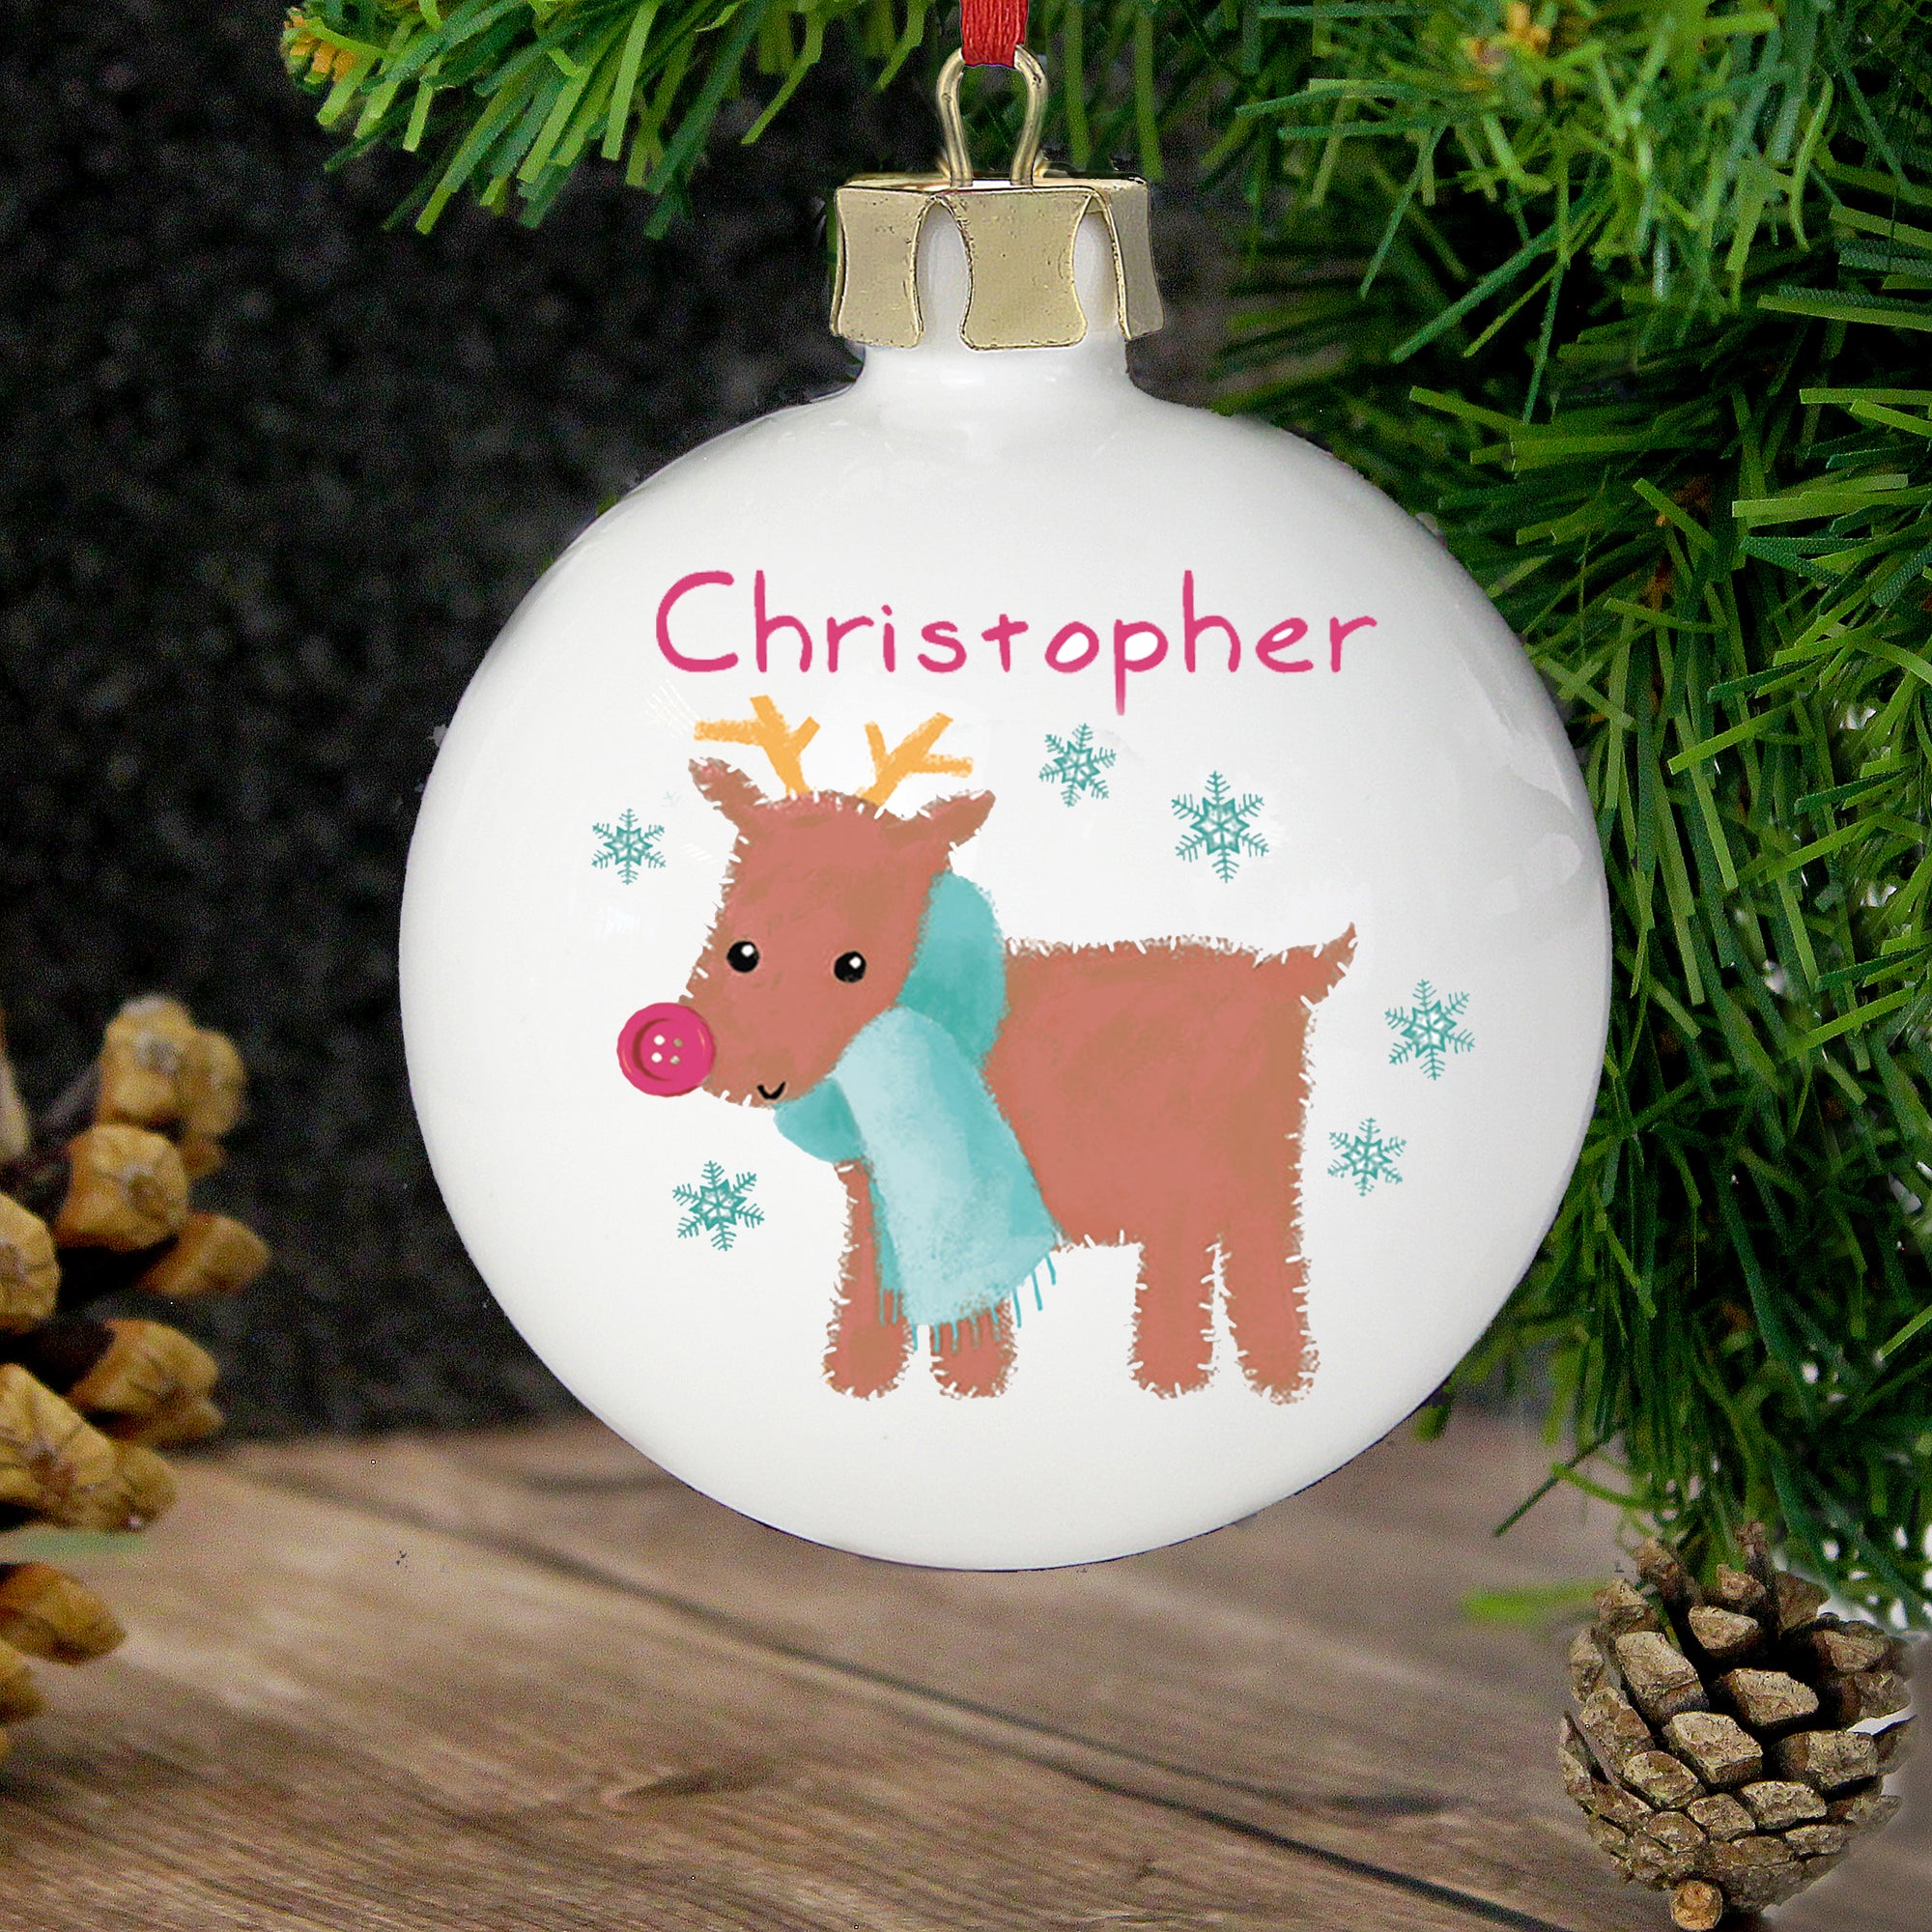 personalised white ceramic round Christmas bauble featuring an image of a hand-drawn reindeer wearing a scarf.  The front of the bauble can be personalised with a name of your choice which will feature above the reindeer and on the back, you can put your own special message over 4 lines.